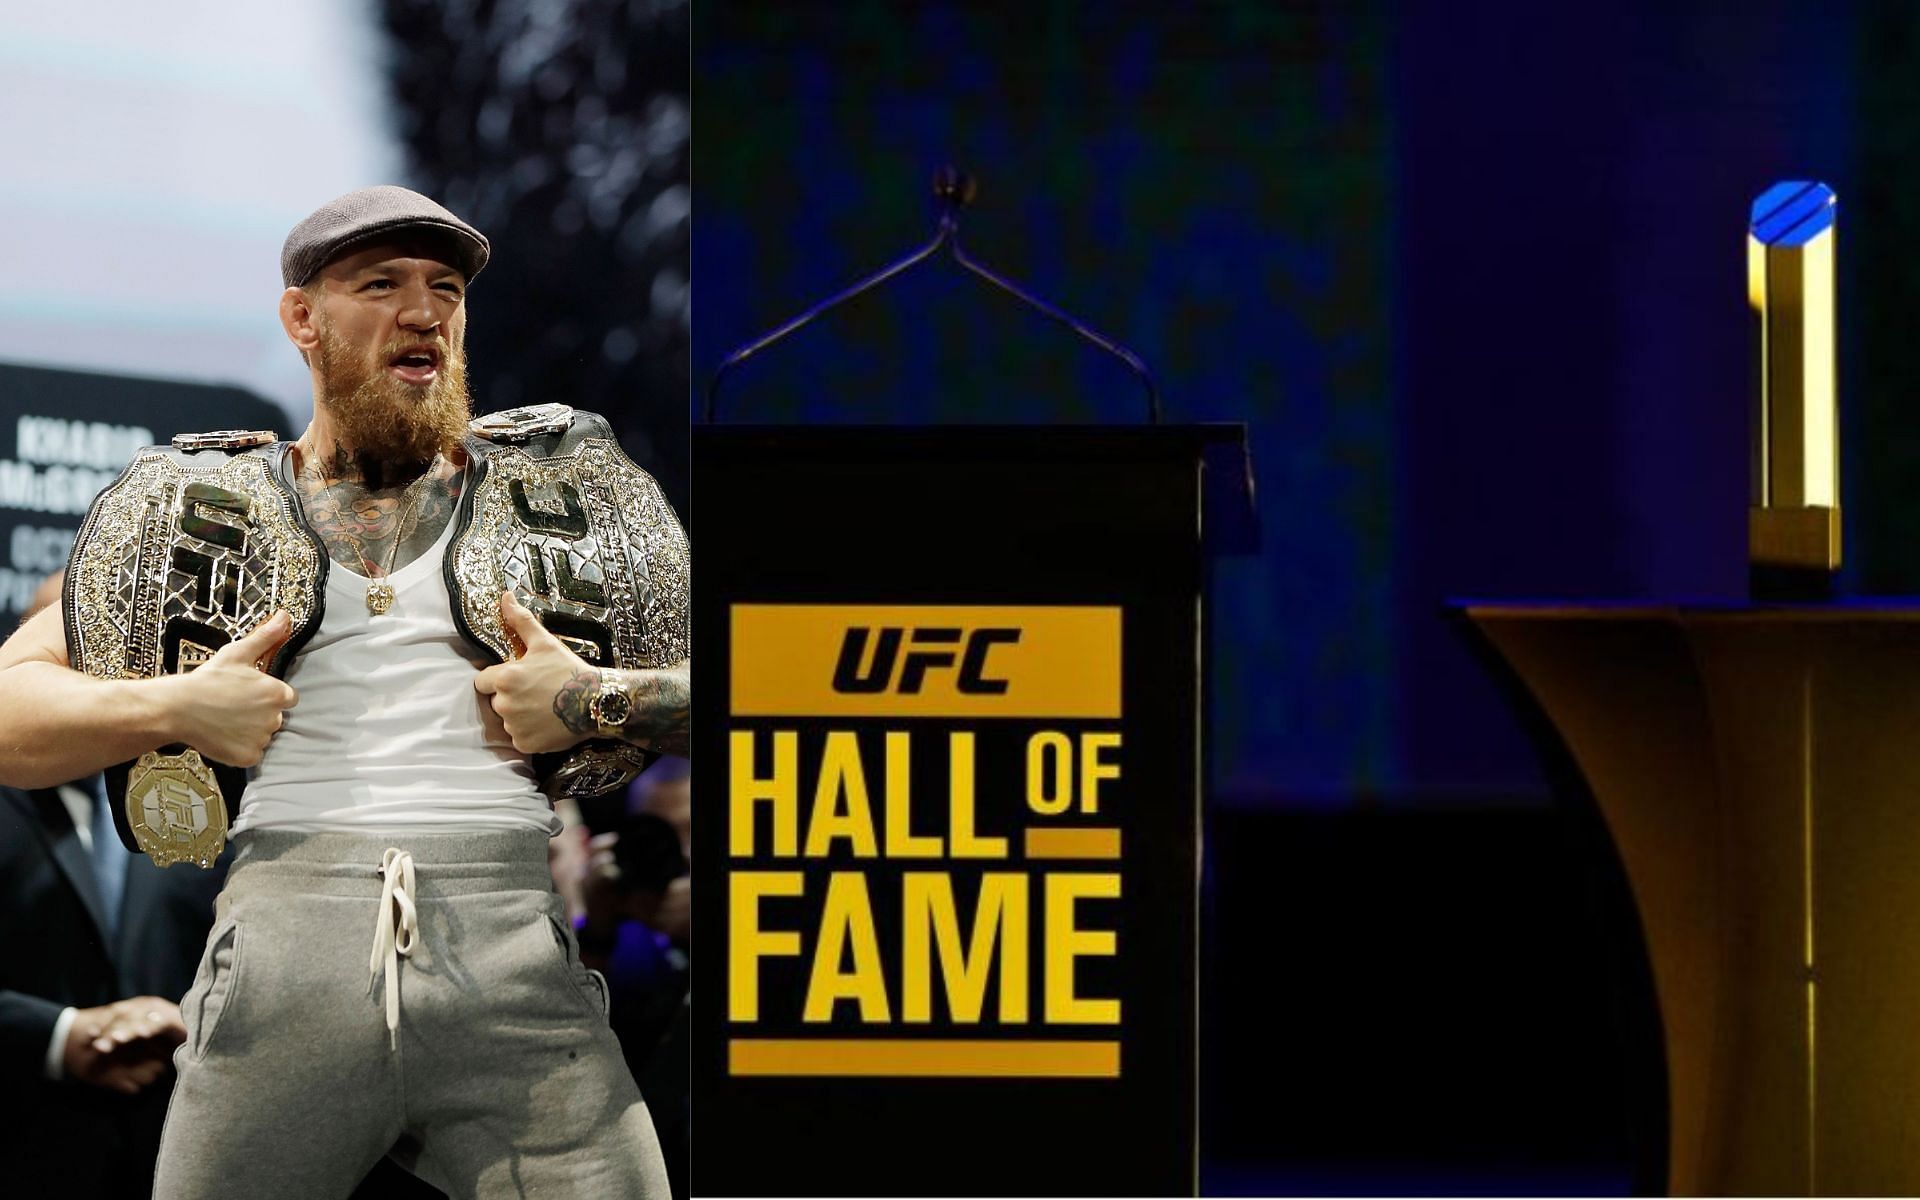 Conor McGregor (Image courtesy: right image from ufc.com)